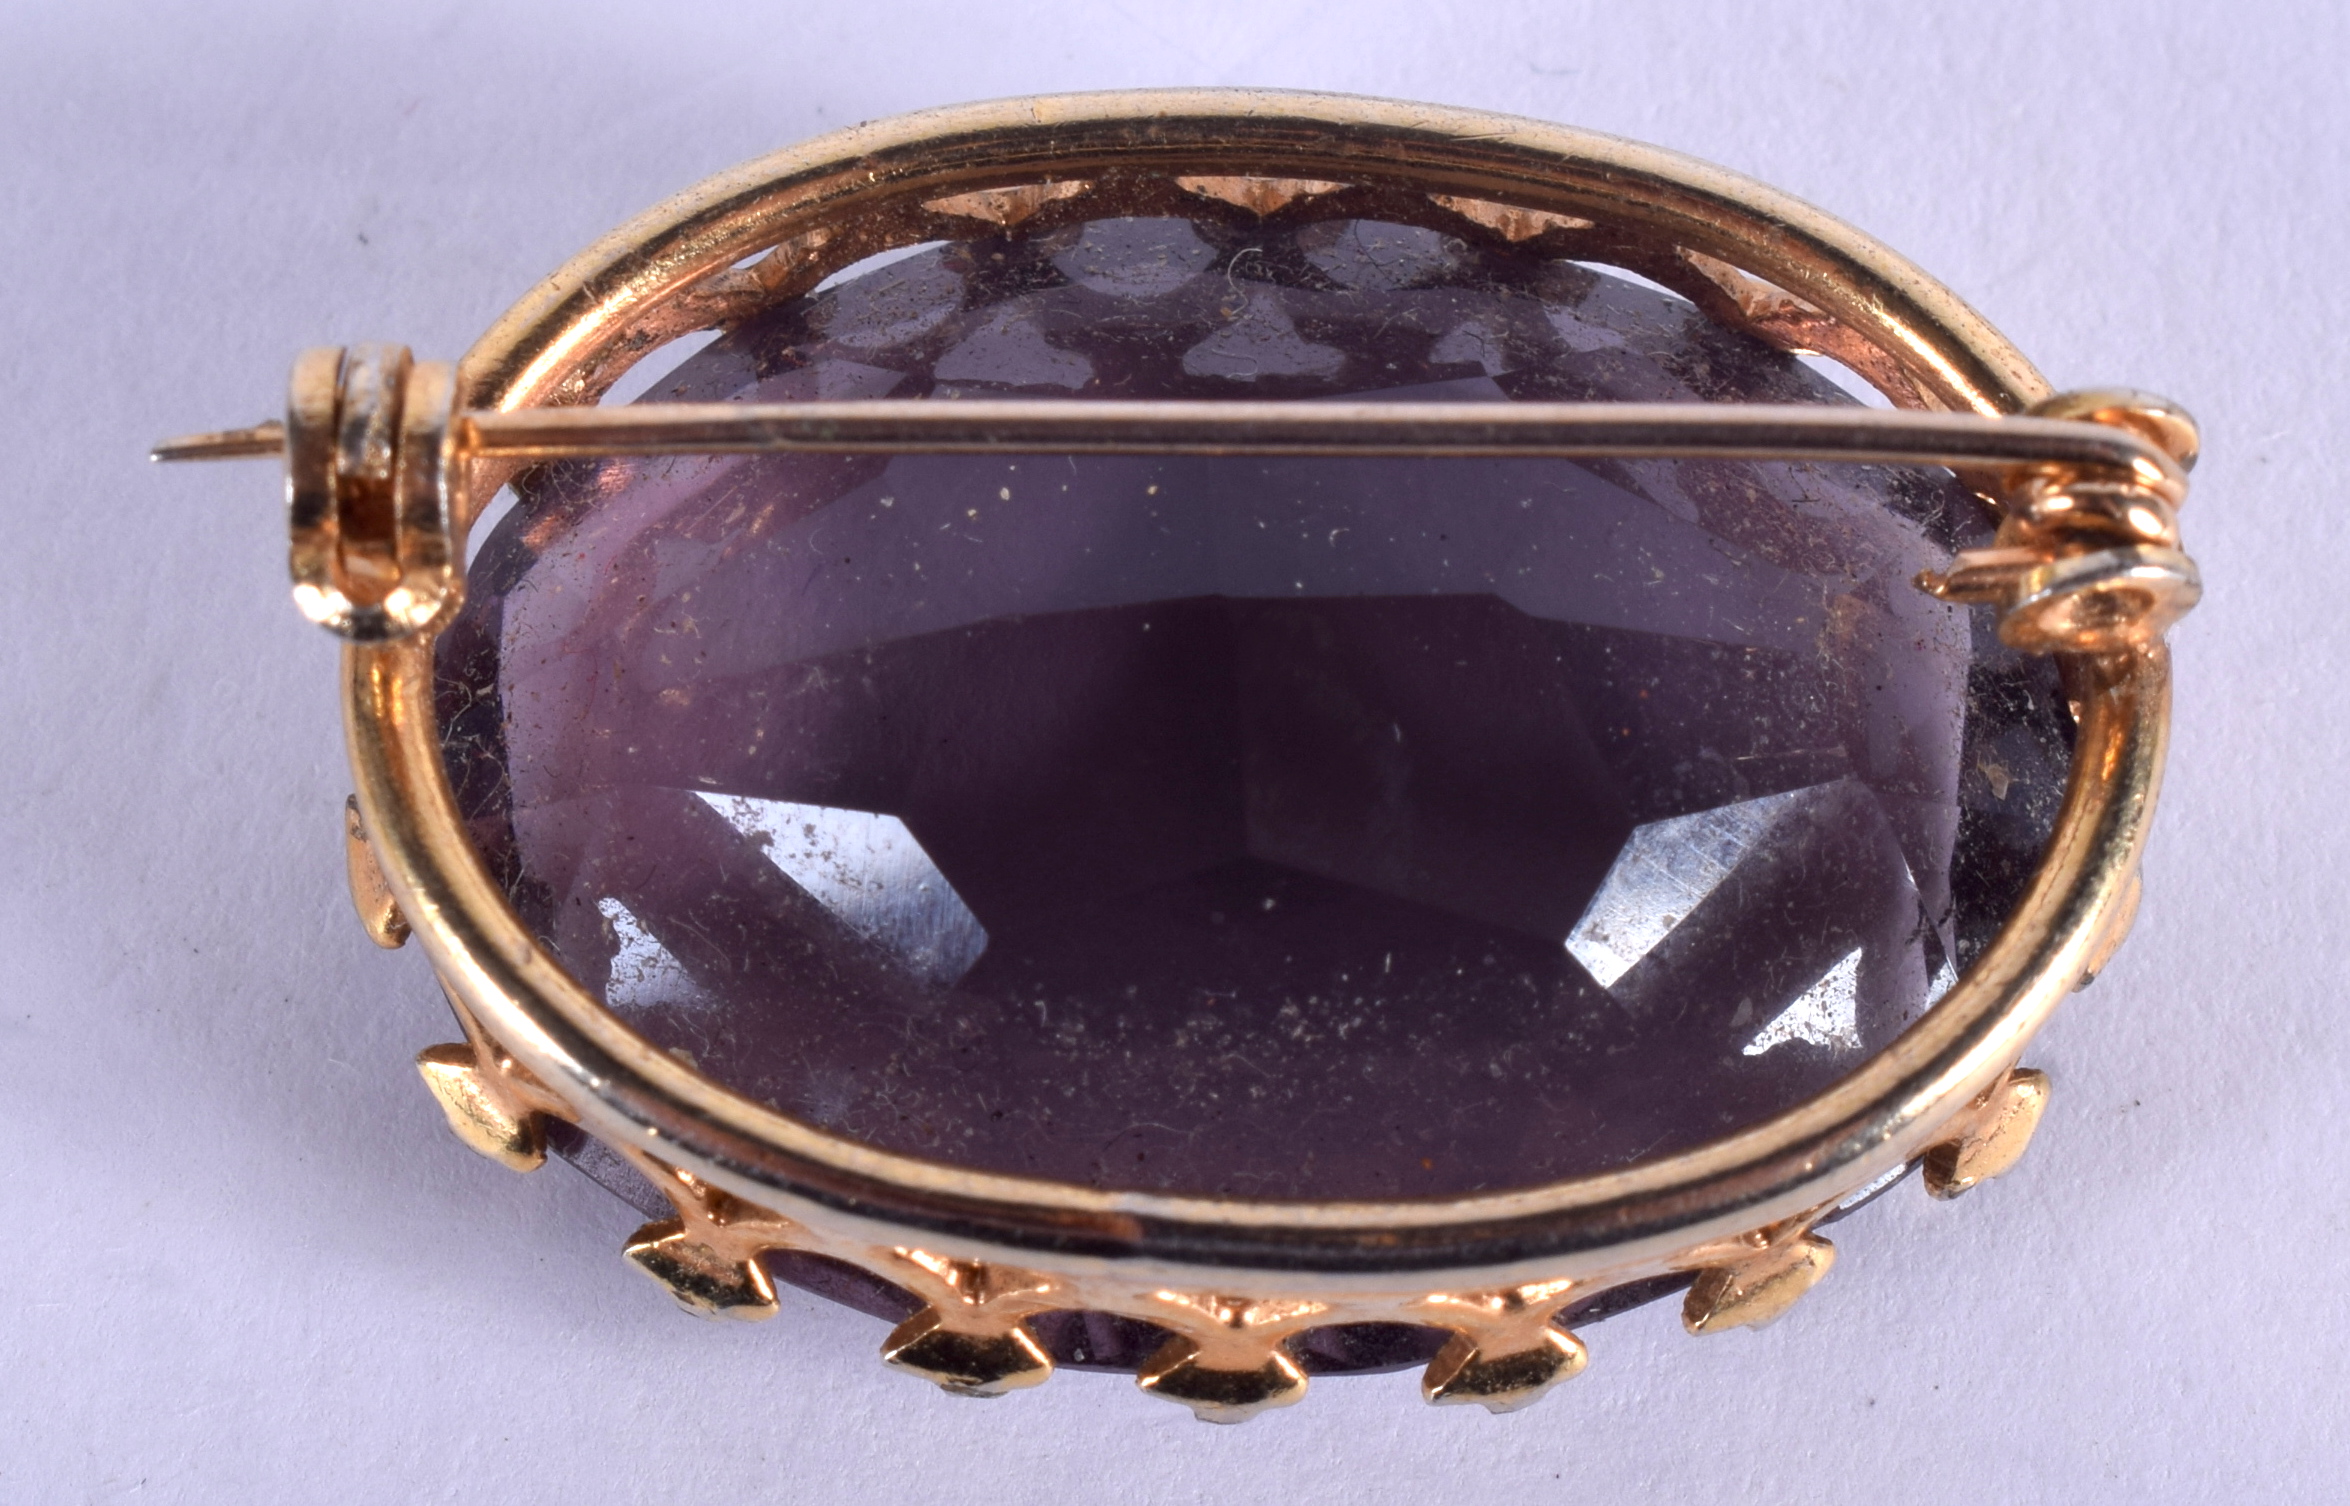 A GOLD AND AMETHYST PENDANT. 10.7 grams. 2 cm x 3 cm. - Image 2 of 2